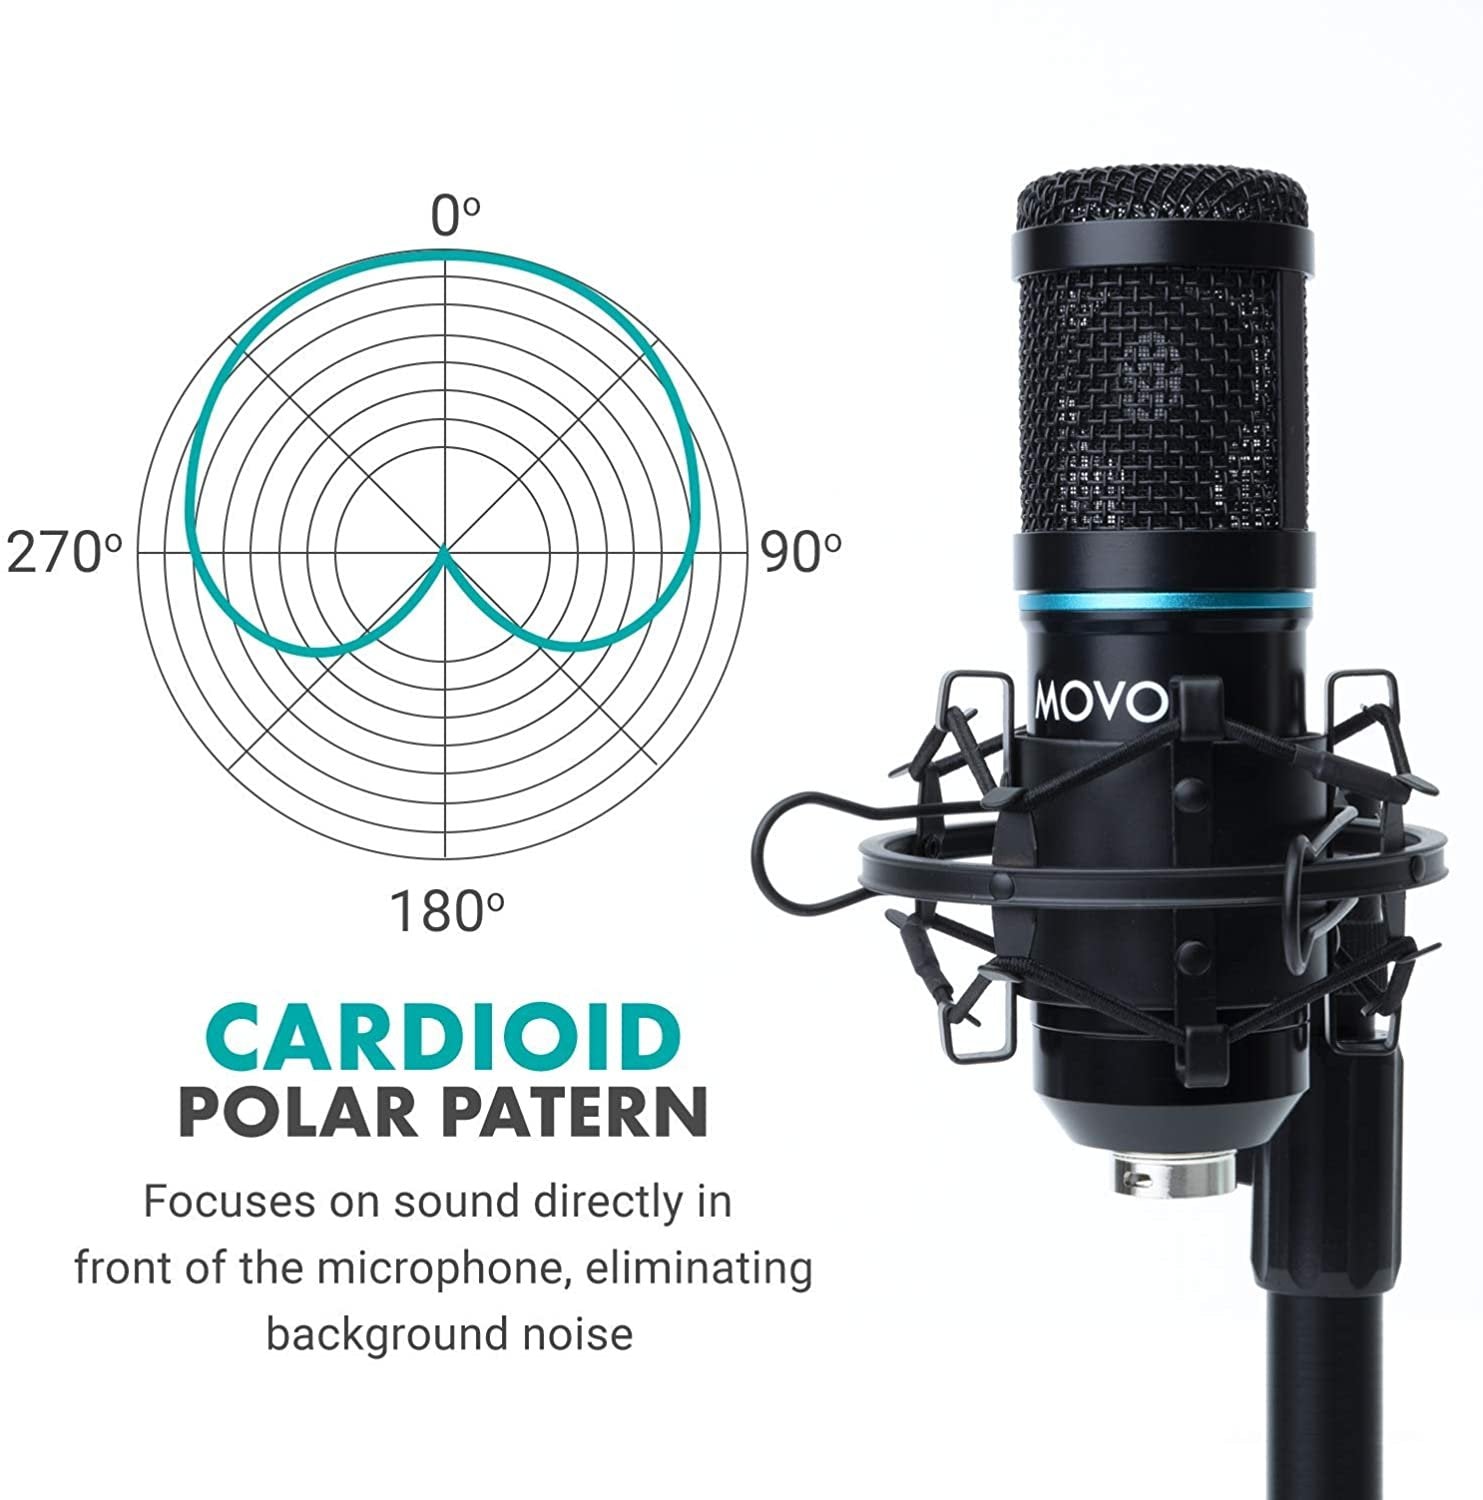 Movo 2-Pack Universal XLR Condenser Microphone Podcasting Equipment Bundle for 2 - Includes 2 Cardioid Mics, Desktop Stands, Shock Mounts, Pop Filters and Cables - Podcast, Zoom, and Youtuber Kit